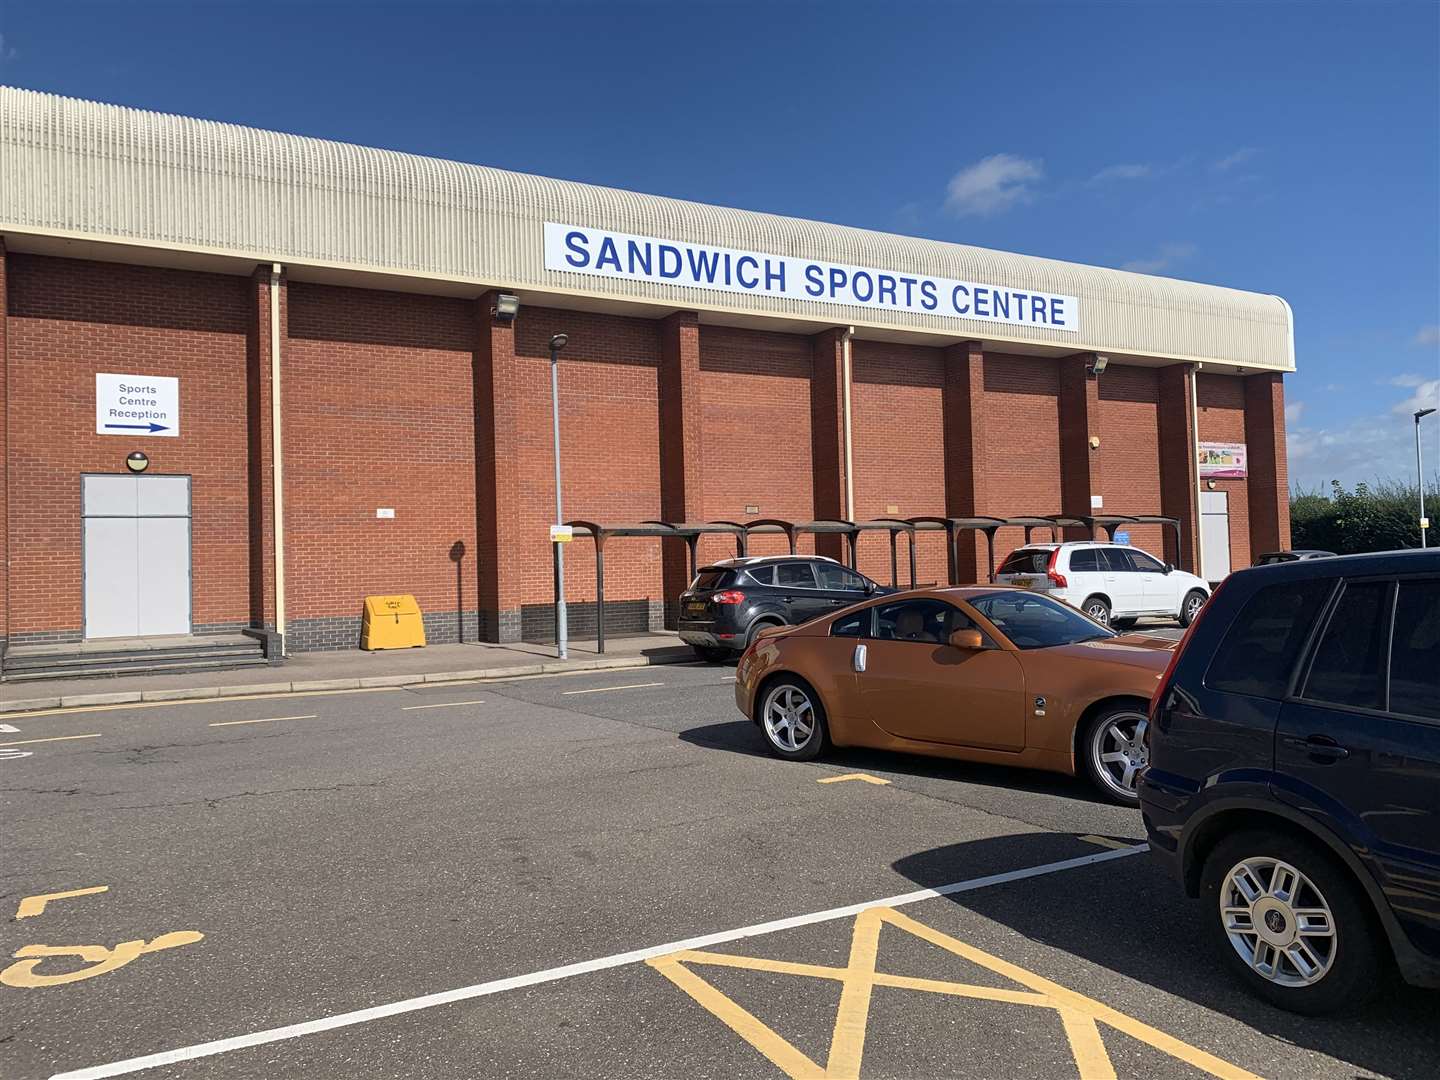 Sandwich Leisure Centre is now leased by Sandwich Technology School and run by Freedom Leisure